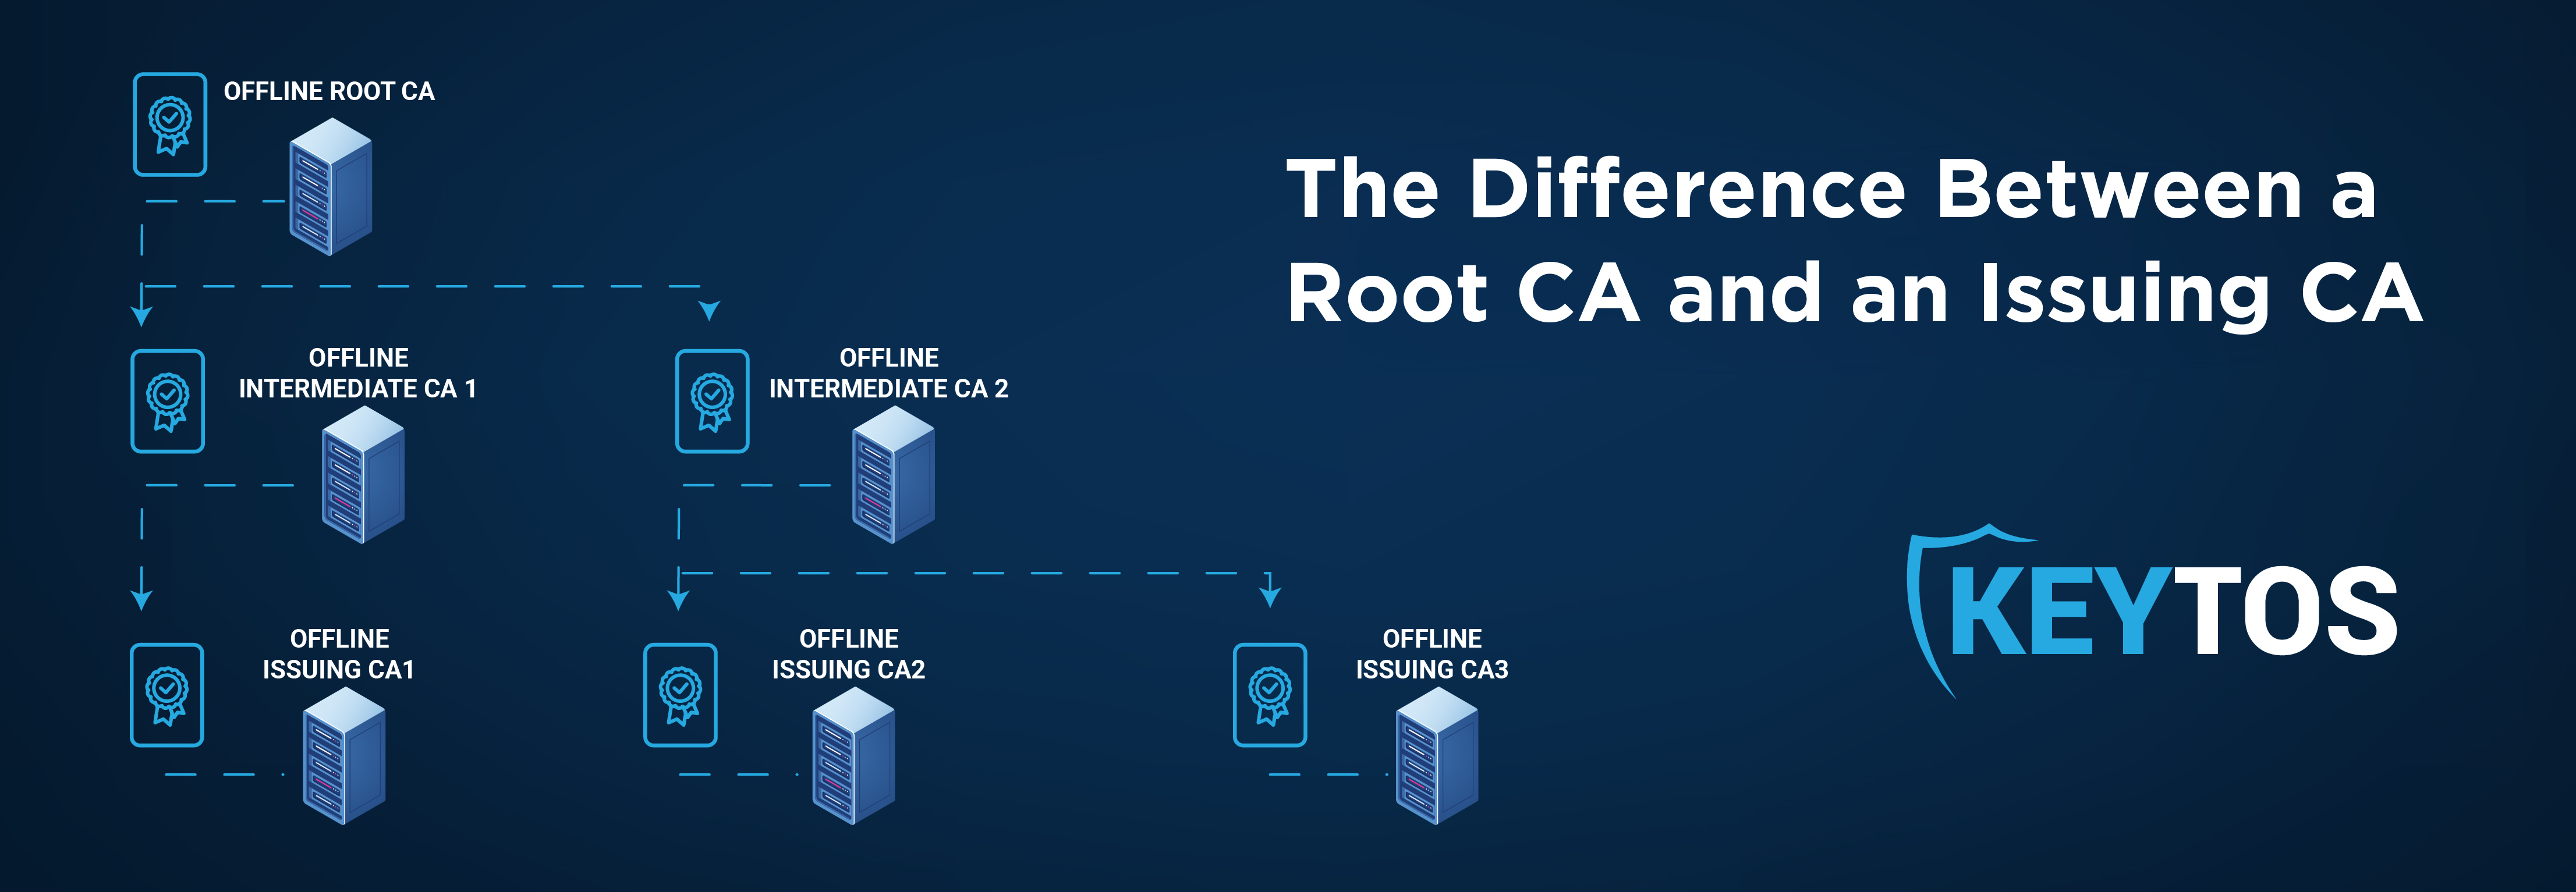 What is the difference between a Root CA and an Issuing/Subordinate CA?